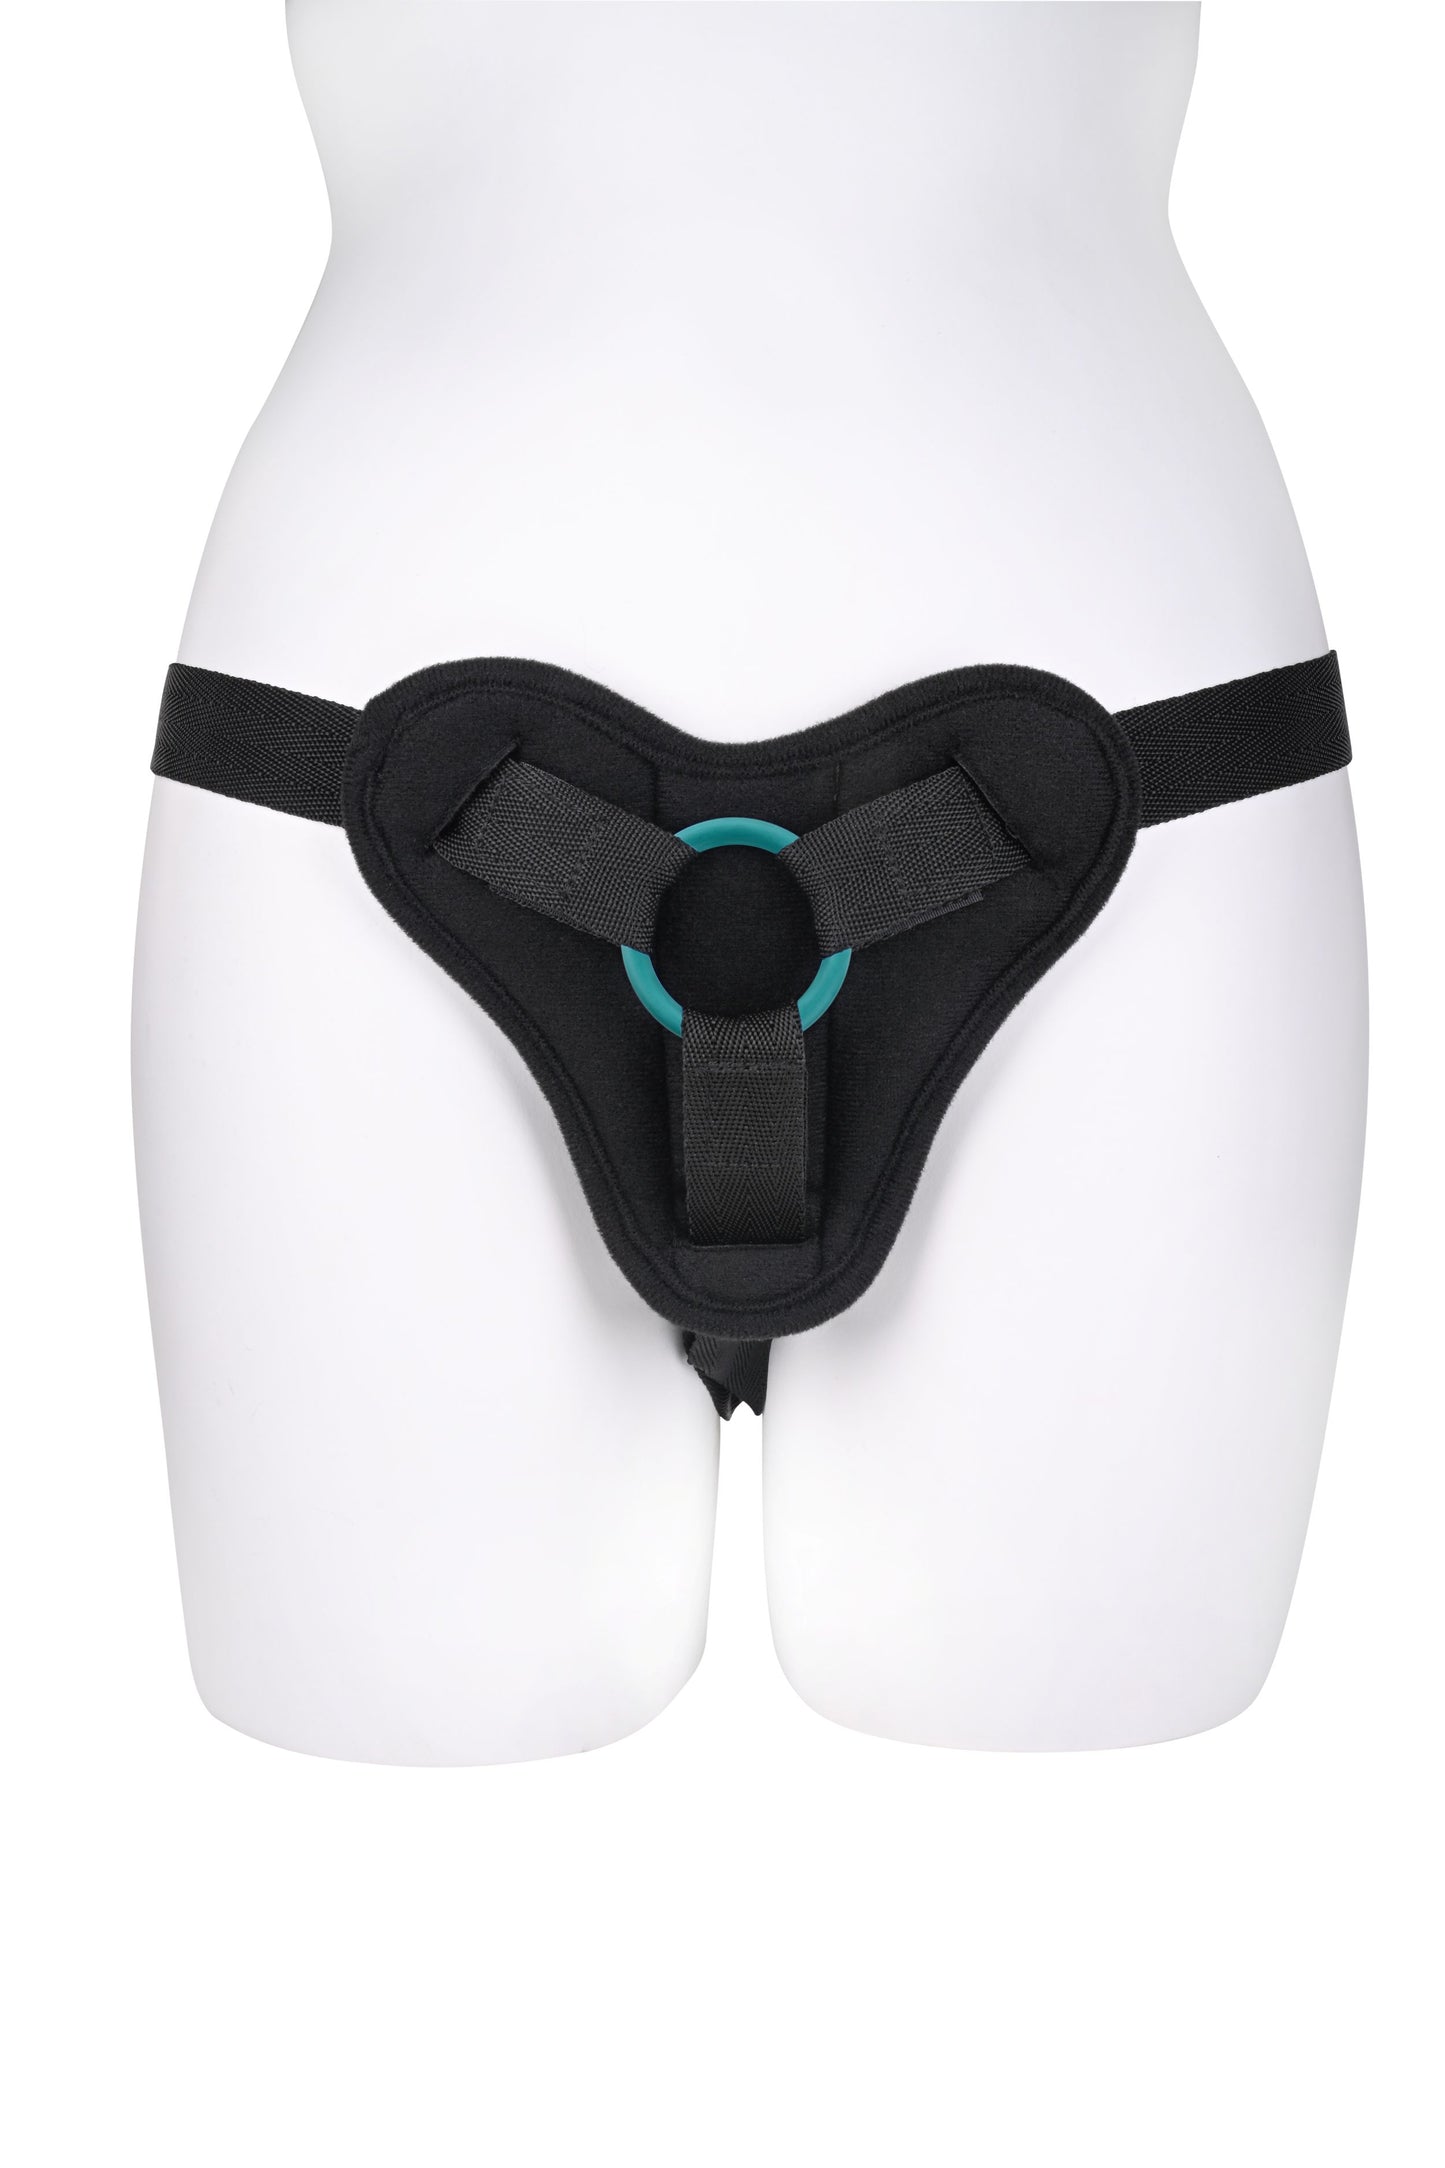 Image shows the front view of a strap-on harness with one of the o-rings on it (emerald).